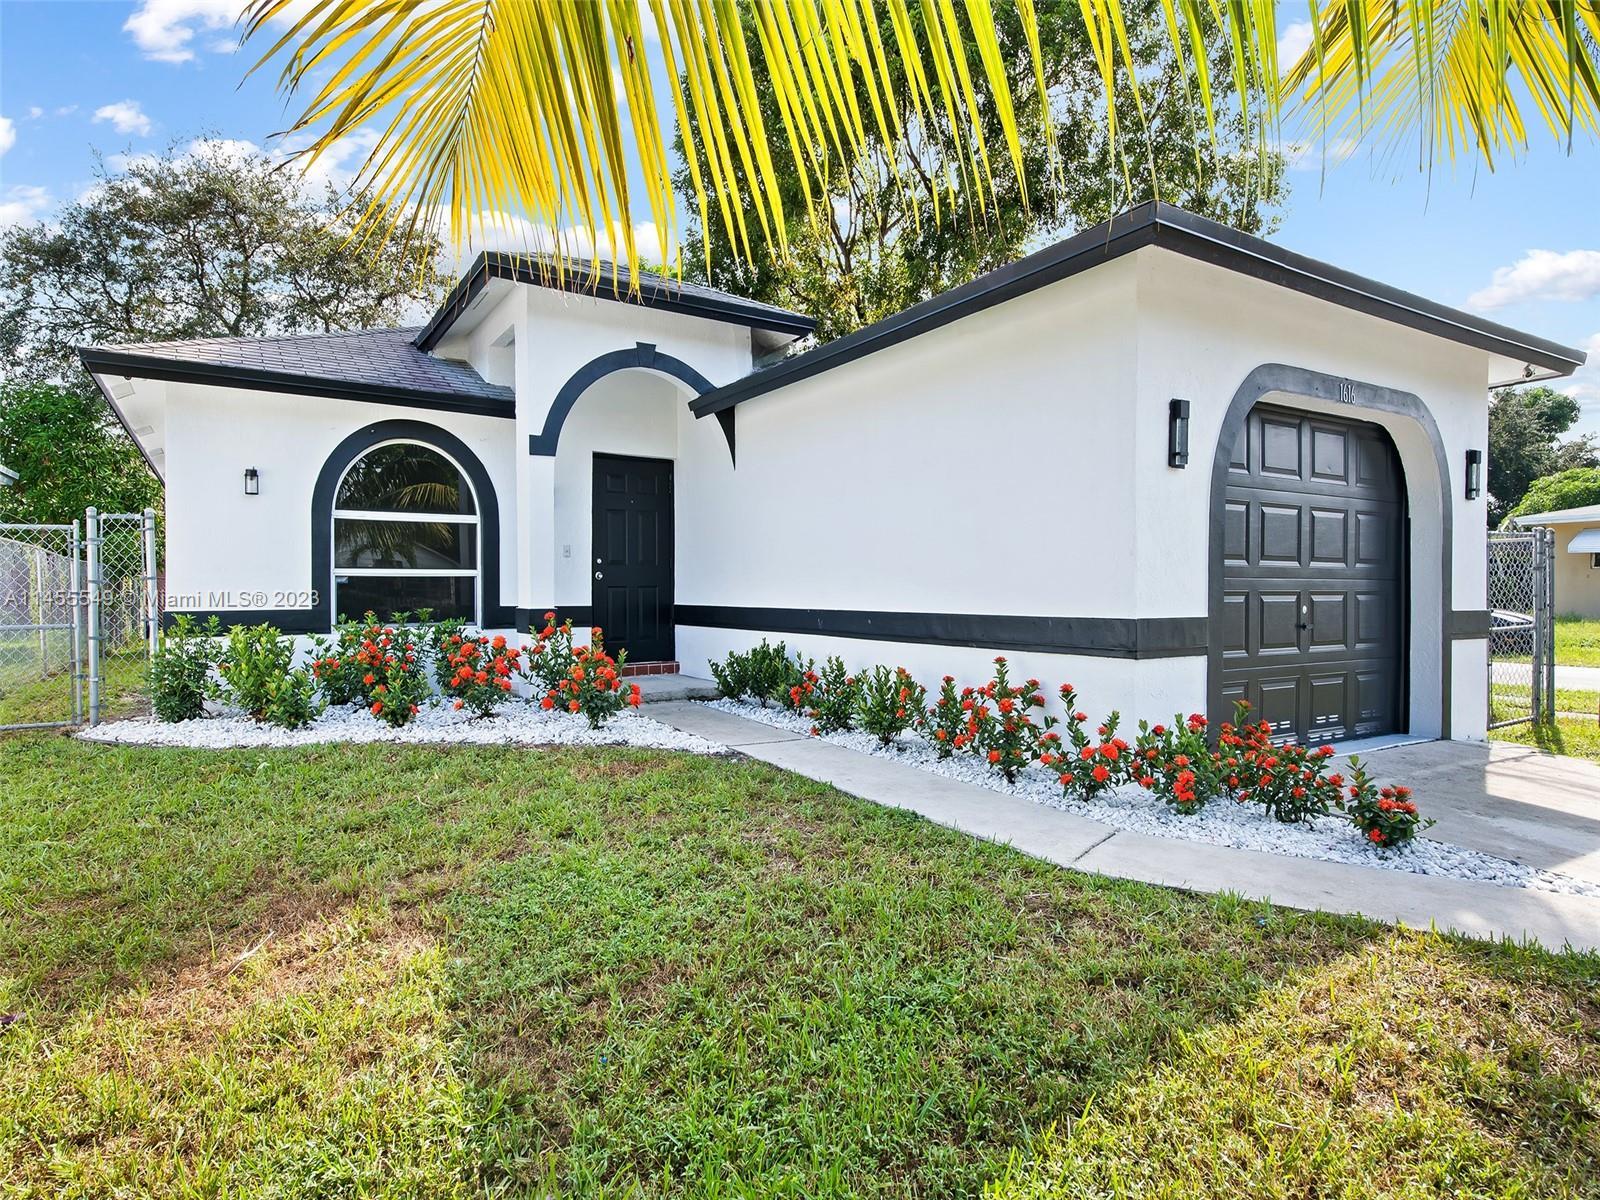 Newly Updated 3/2!!! 7 minute drive to Las Olas and 10 minute drive to FTL Beach.